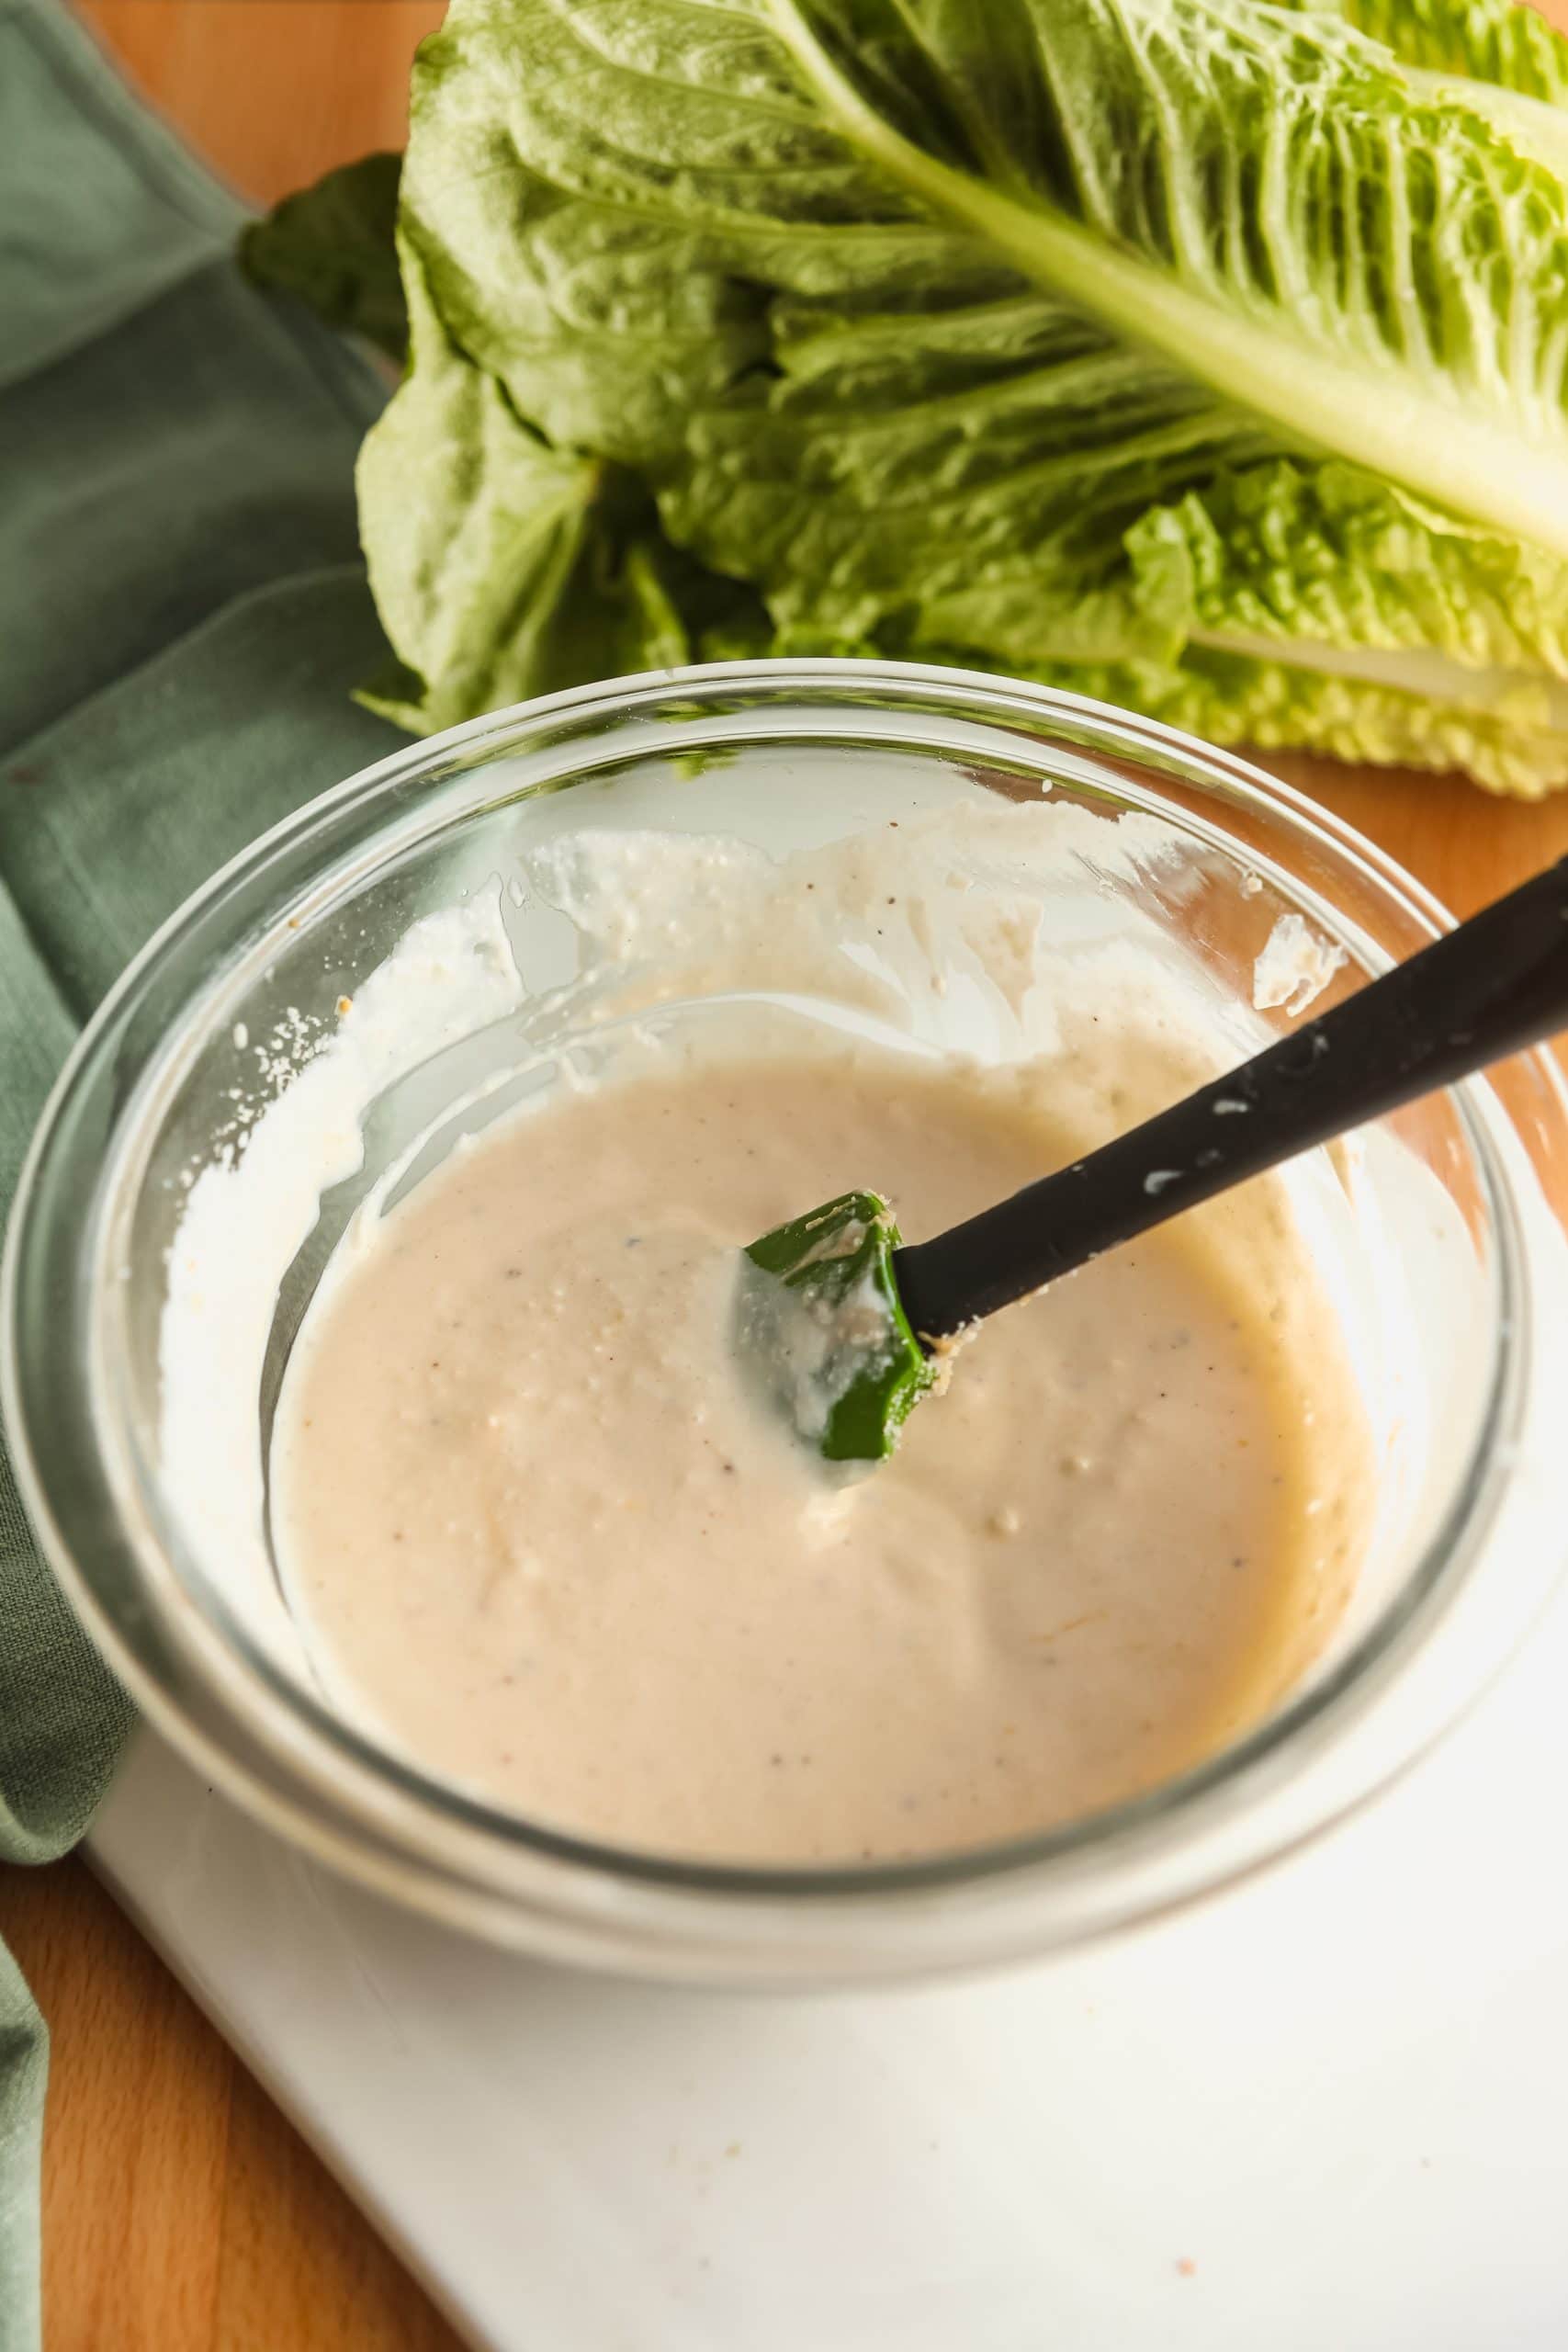 Mixing the homemade Caesar dressing in a glass mixing bowl.